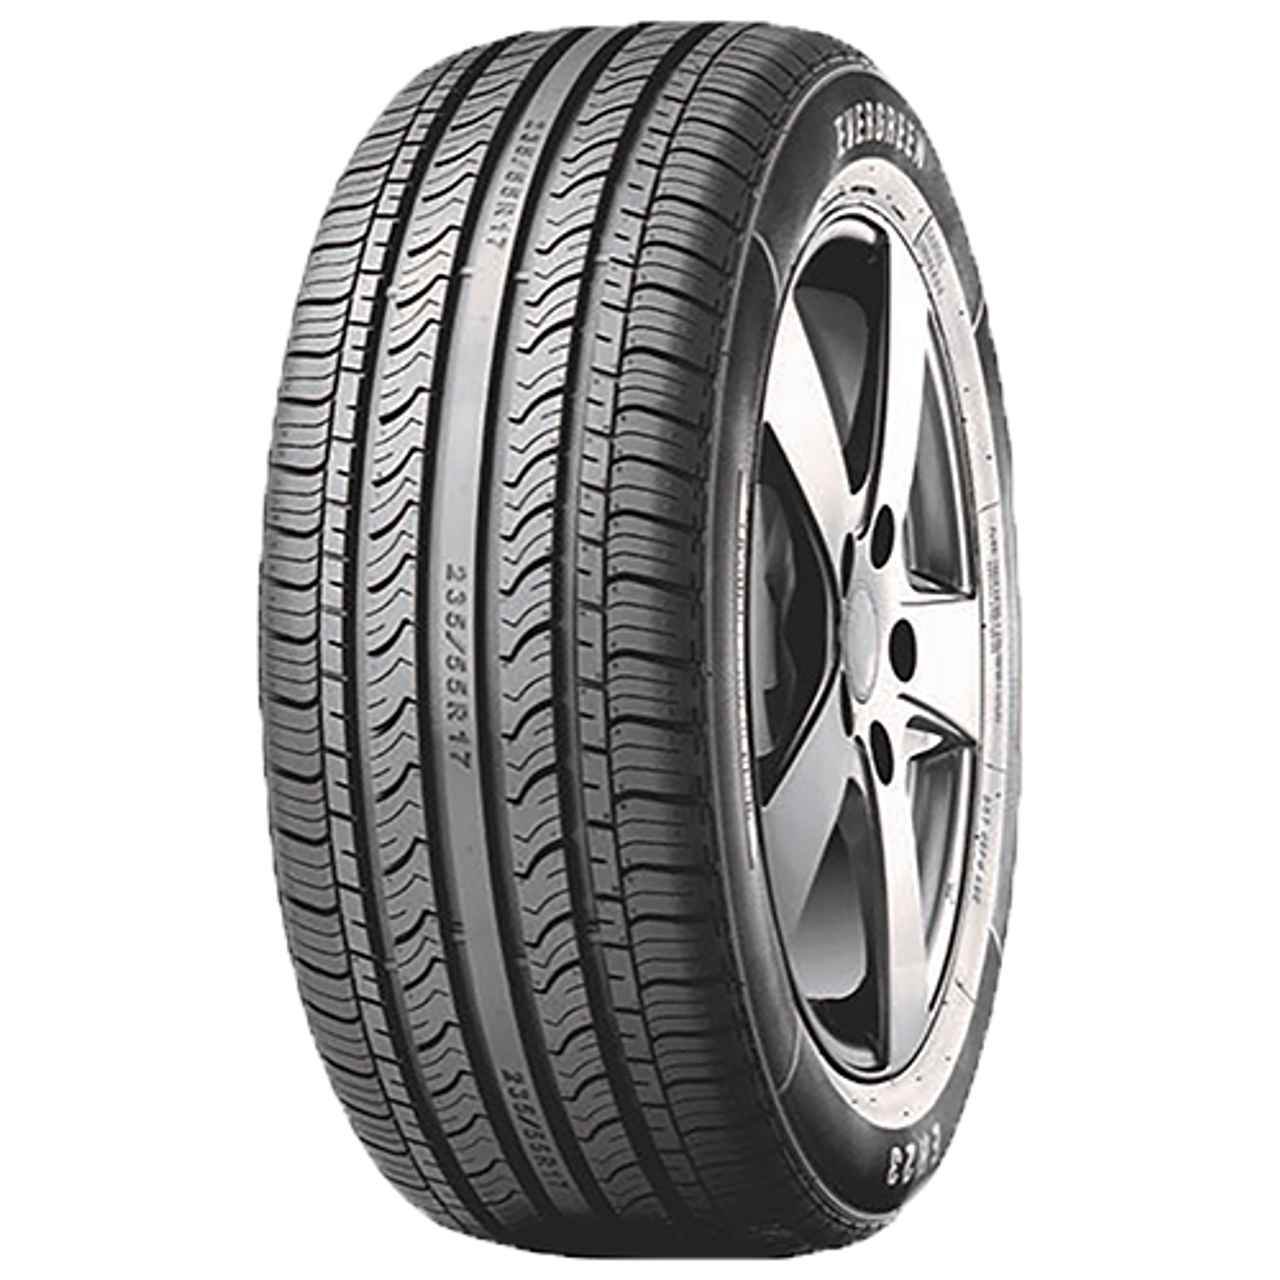 EVERGREEN EH23 185/65R15 88H BSW